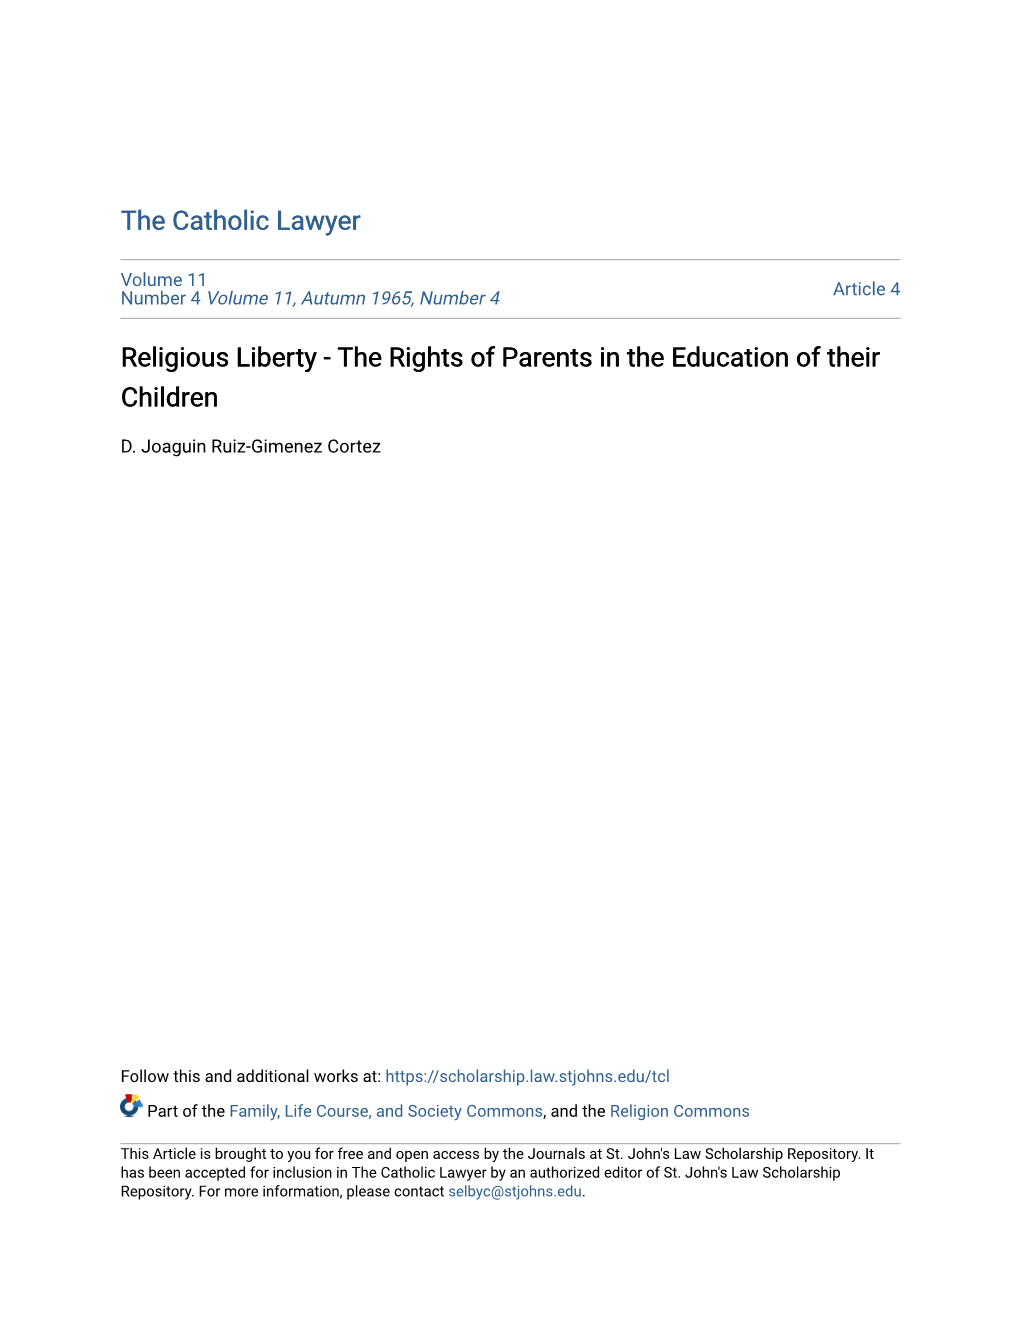 Religious Liberty - the Rights of Parents in the Education of Their Children